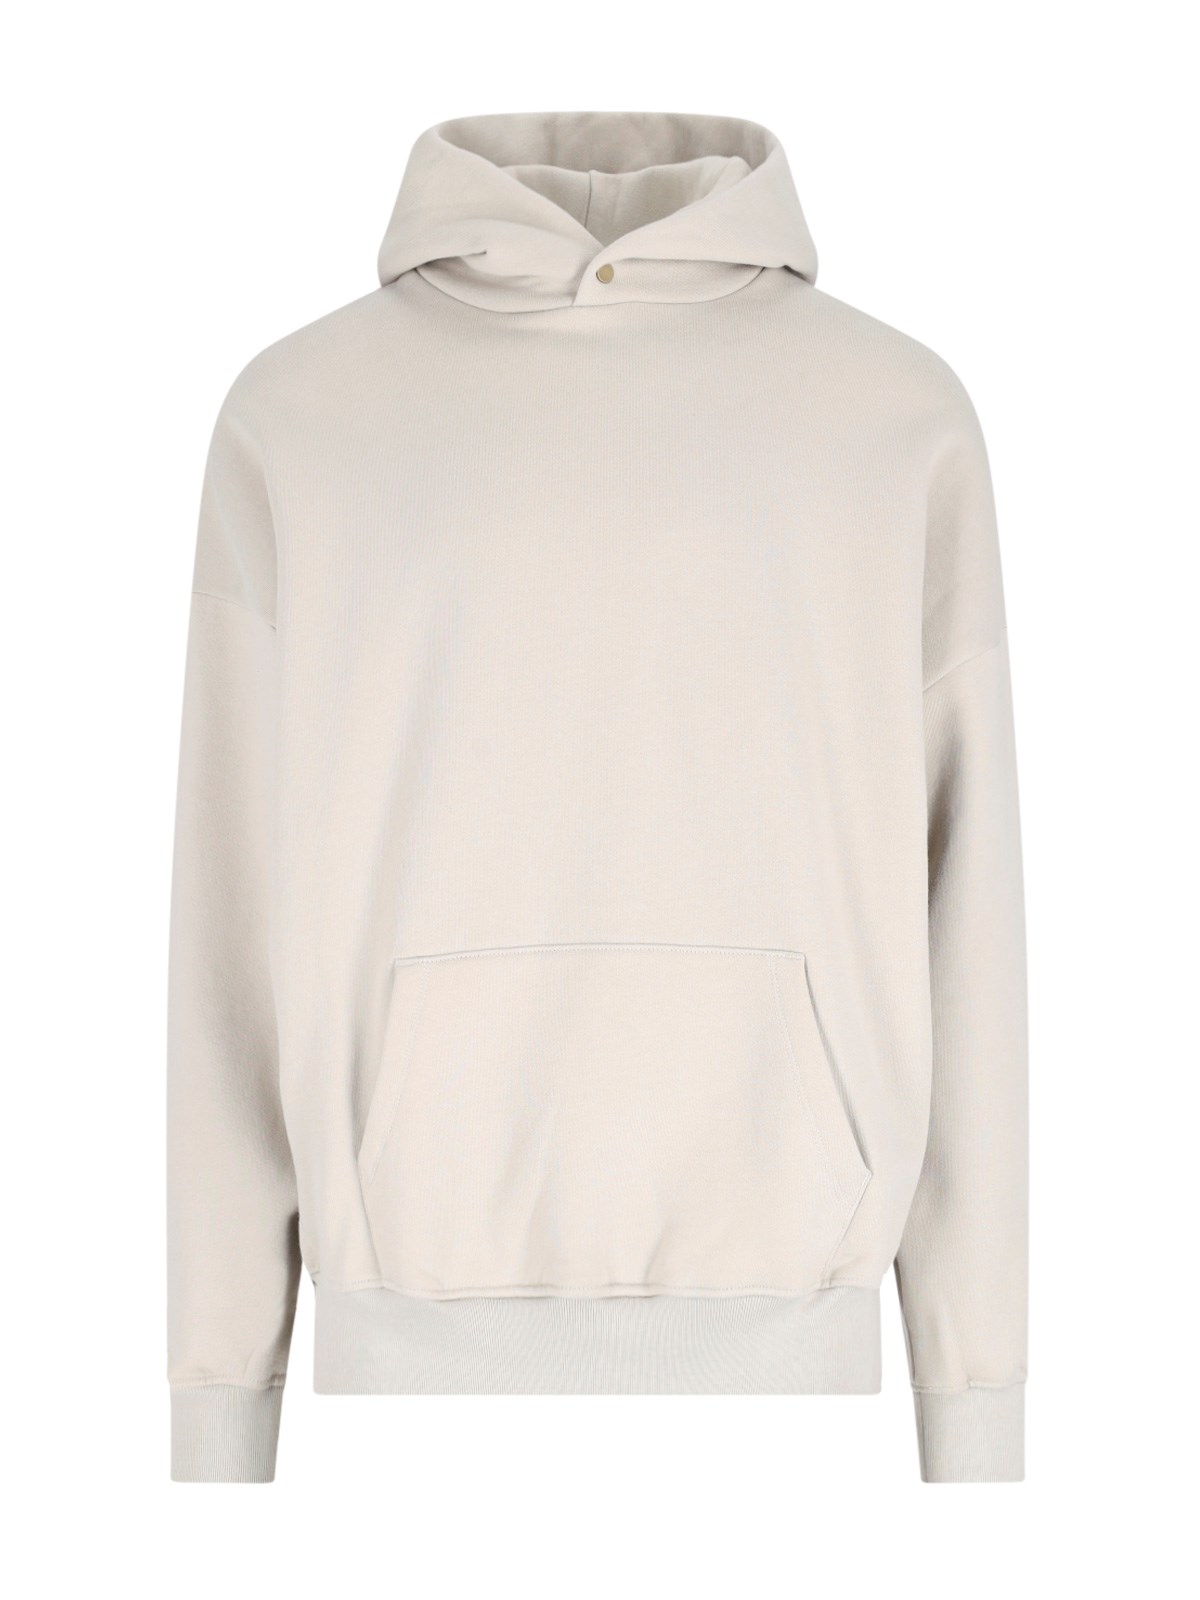 Fear of god 'eternal' hoodie available on SUGAR - 97176